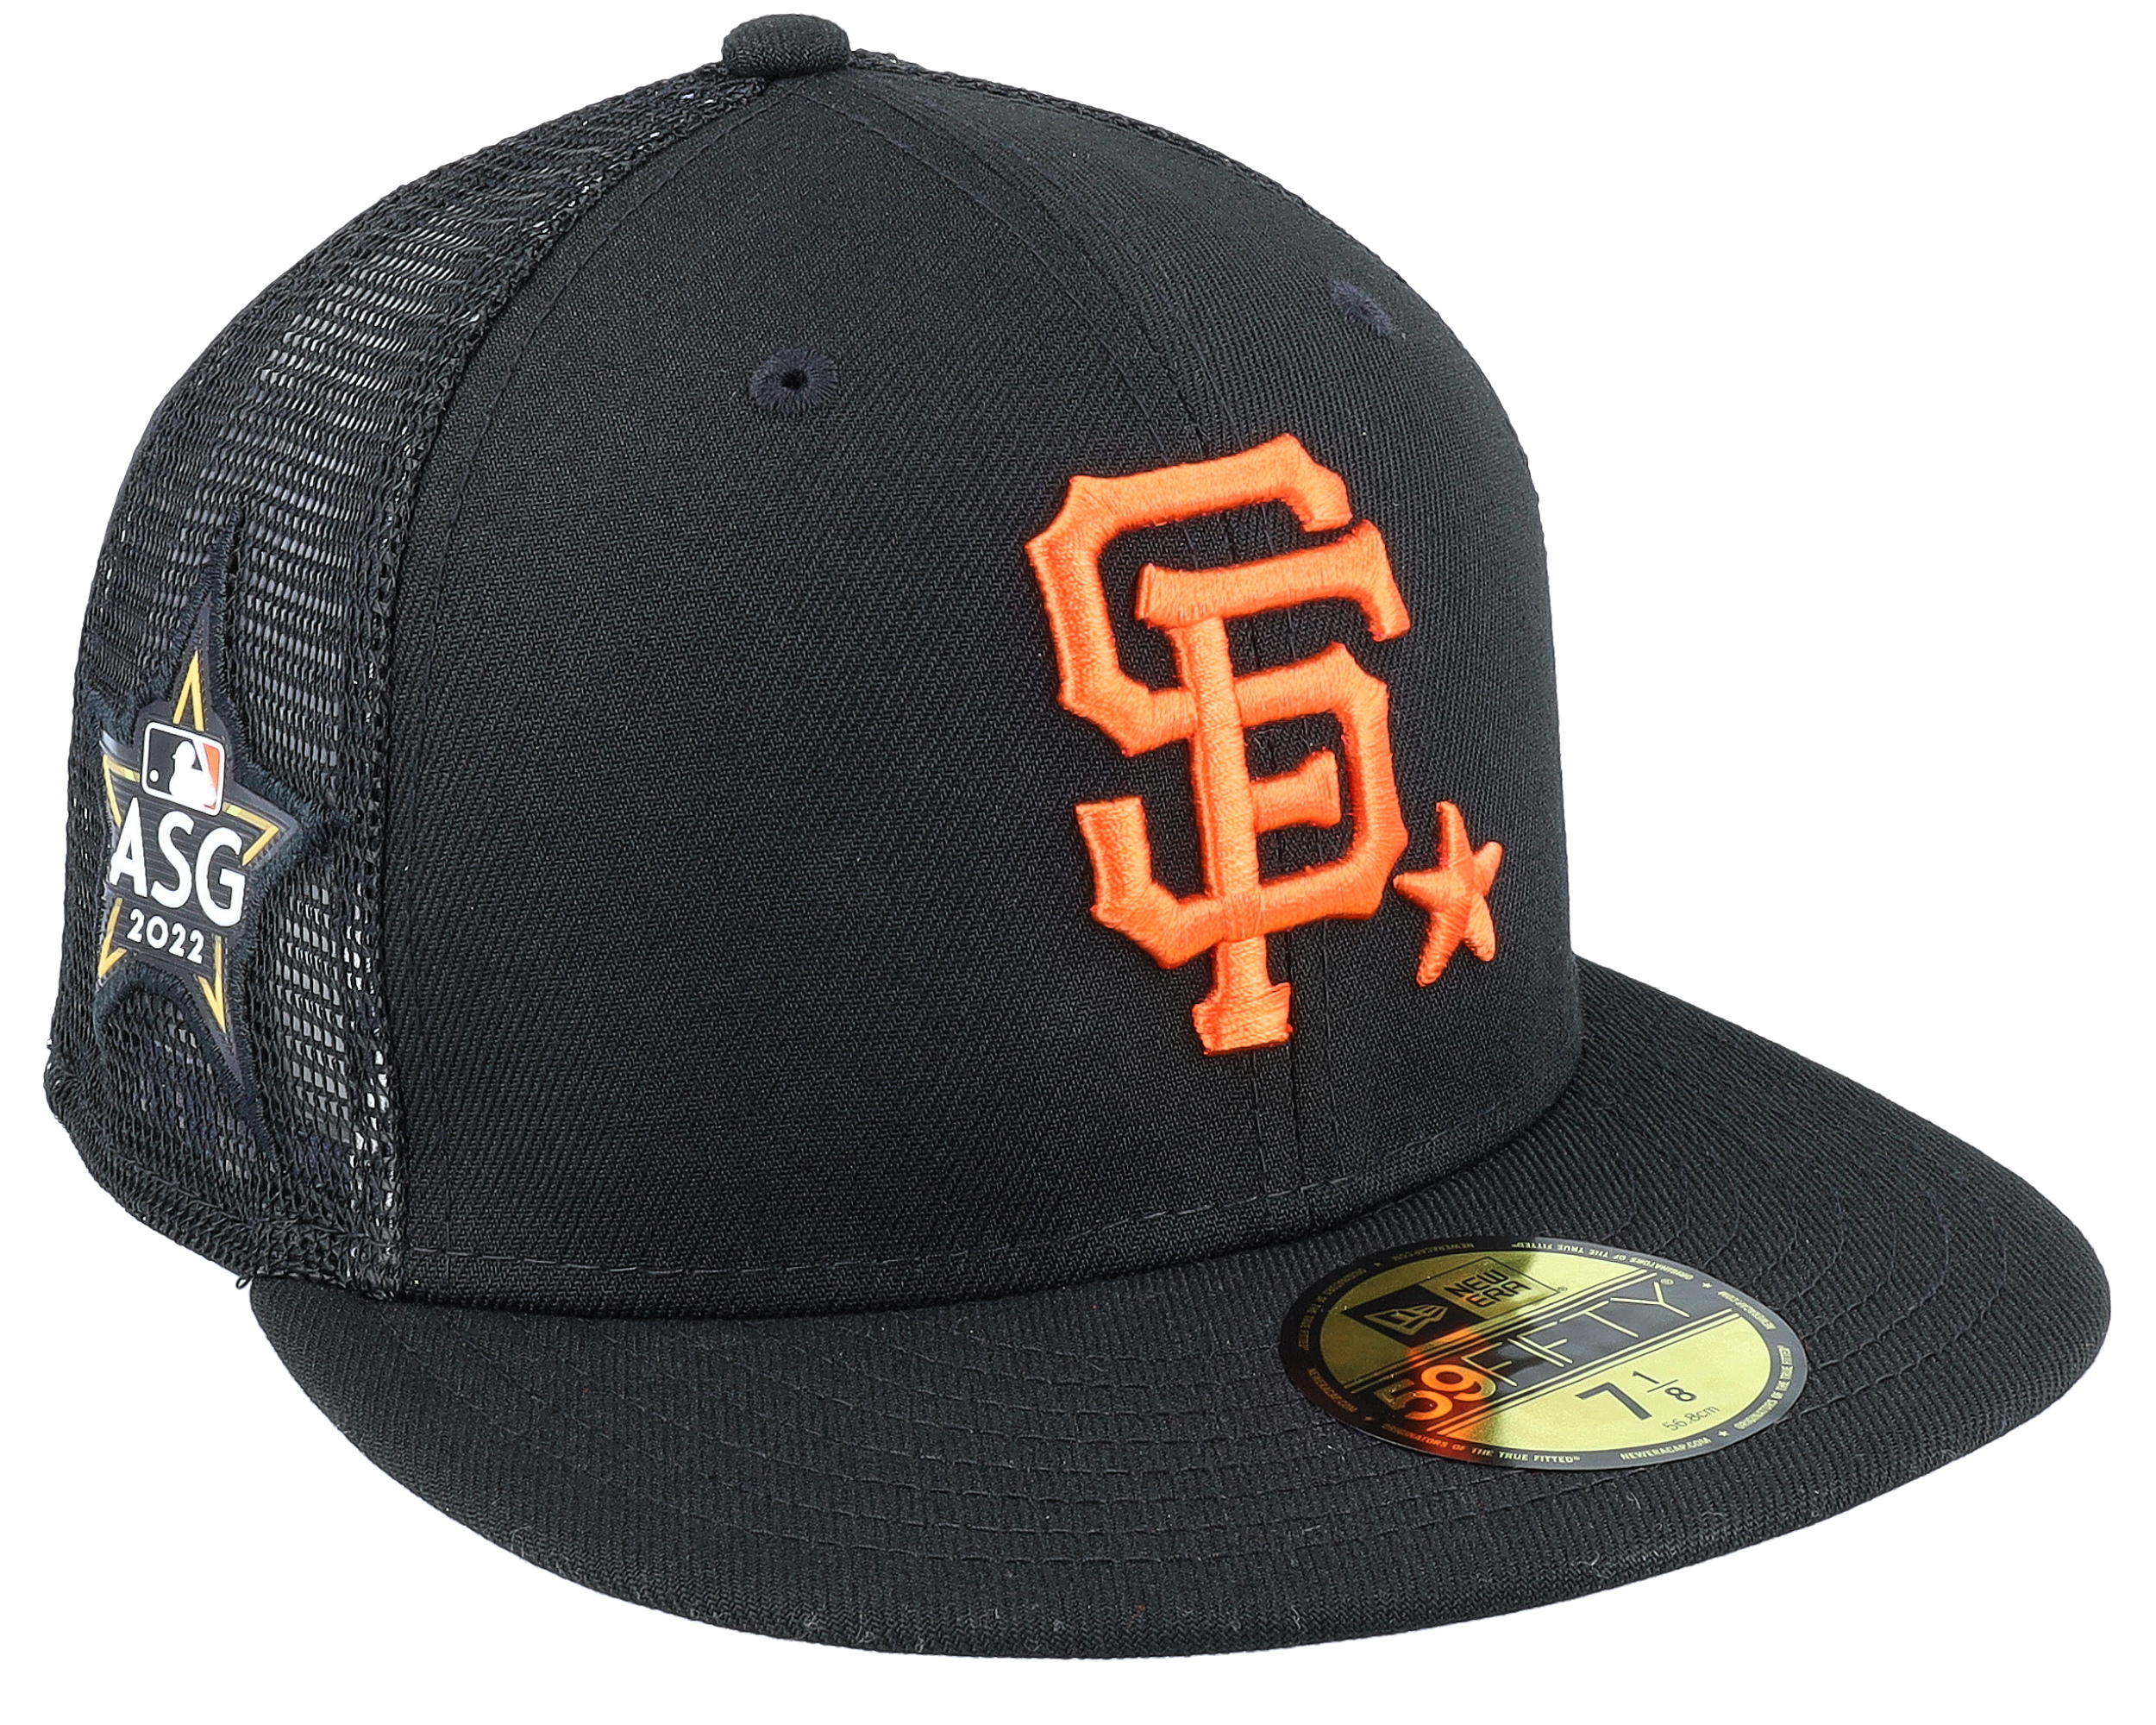 New Era Caps San Francisco Giants Black Gray 59FIFTY Fitted Hat